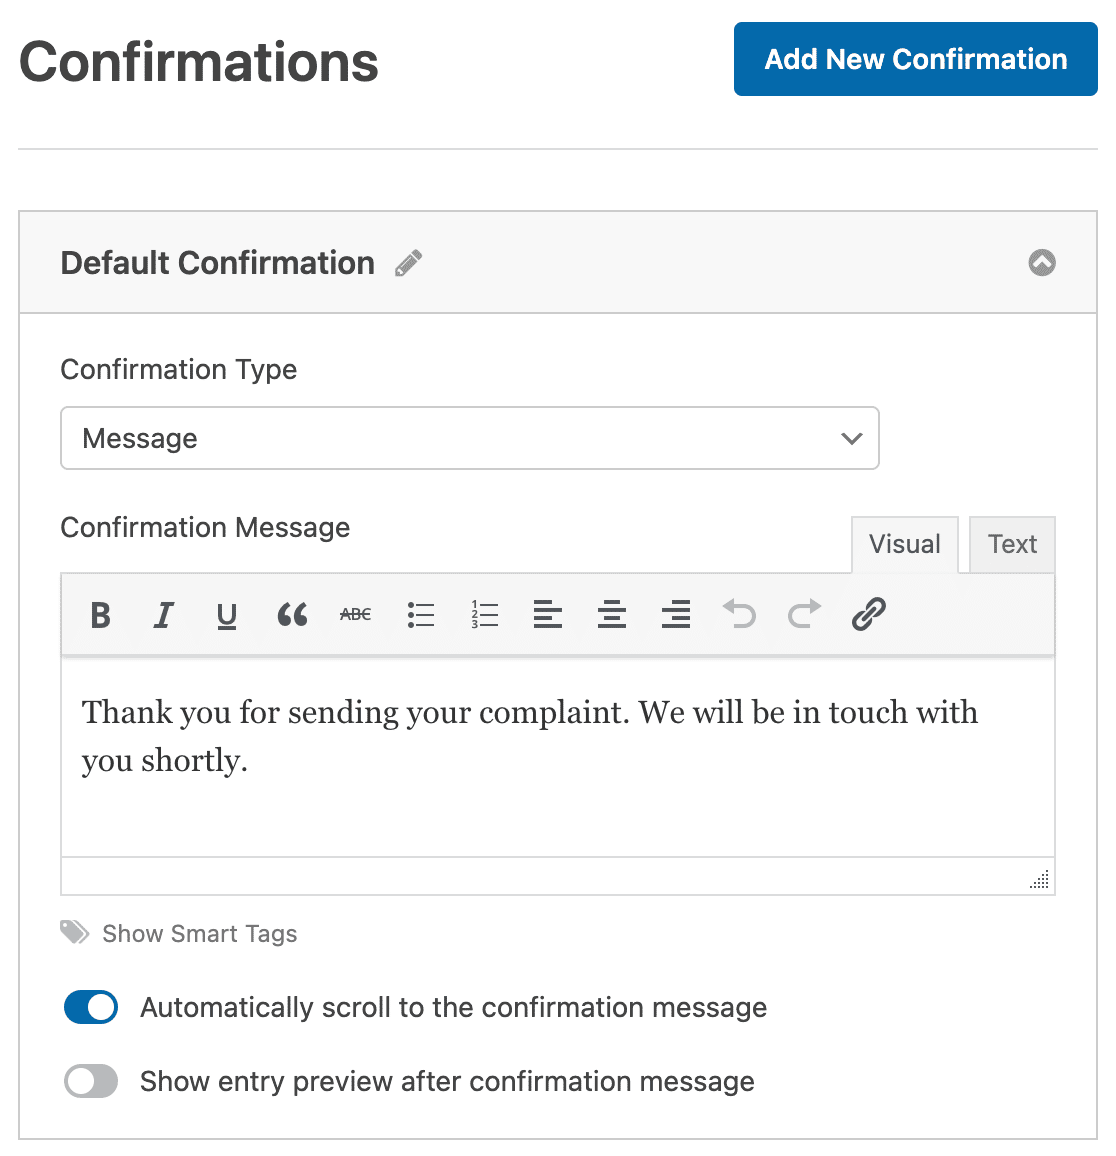 Customizing the complaint form confirmation message